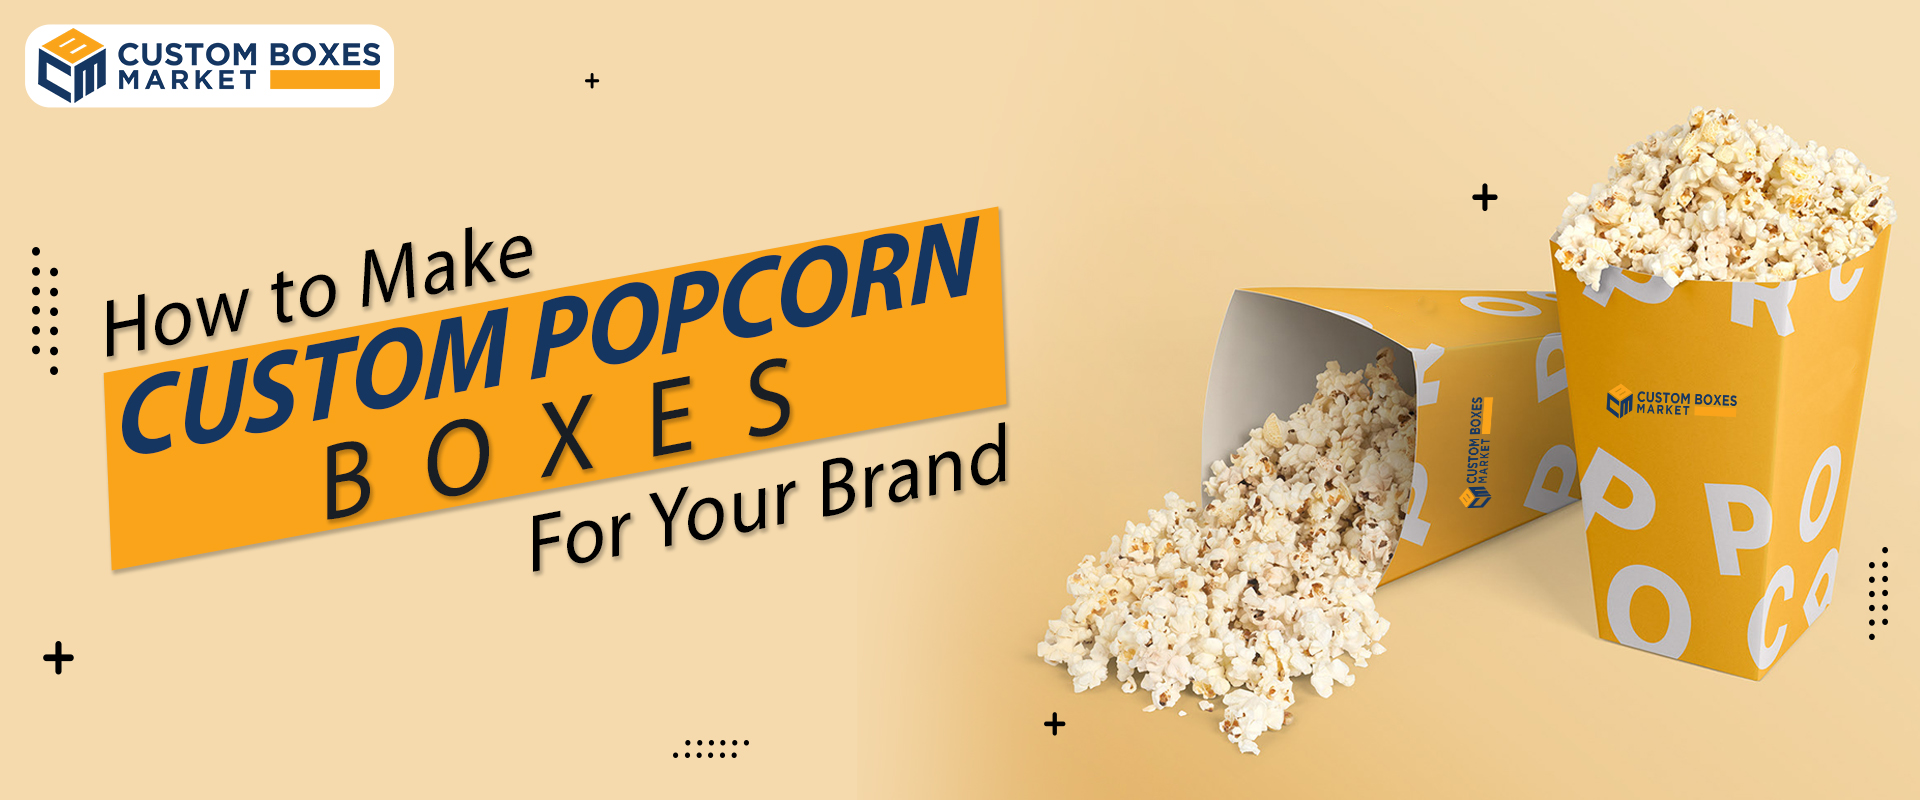 How to Make Custom Popcorn Boxes For Your Brand